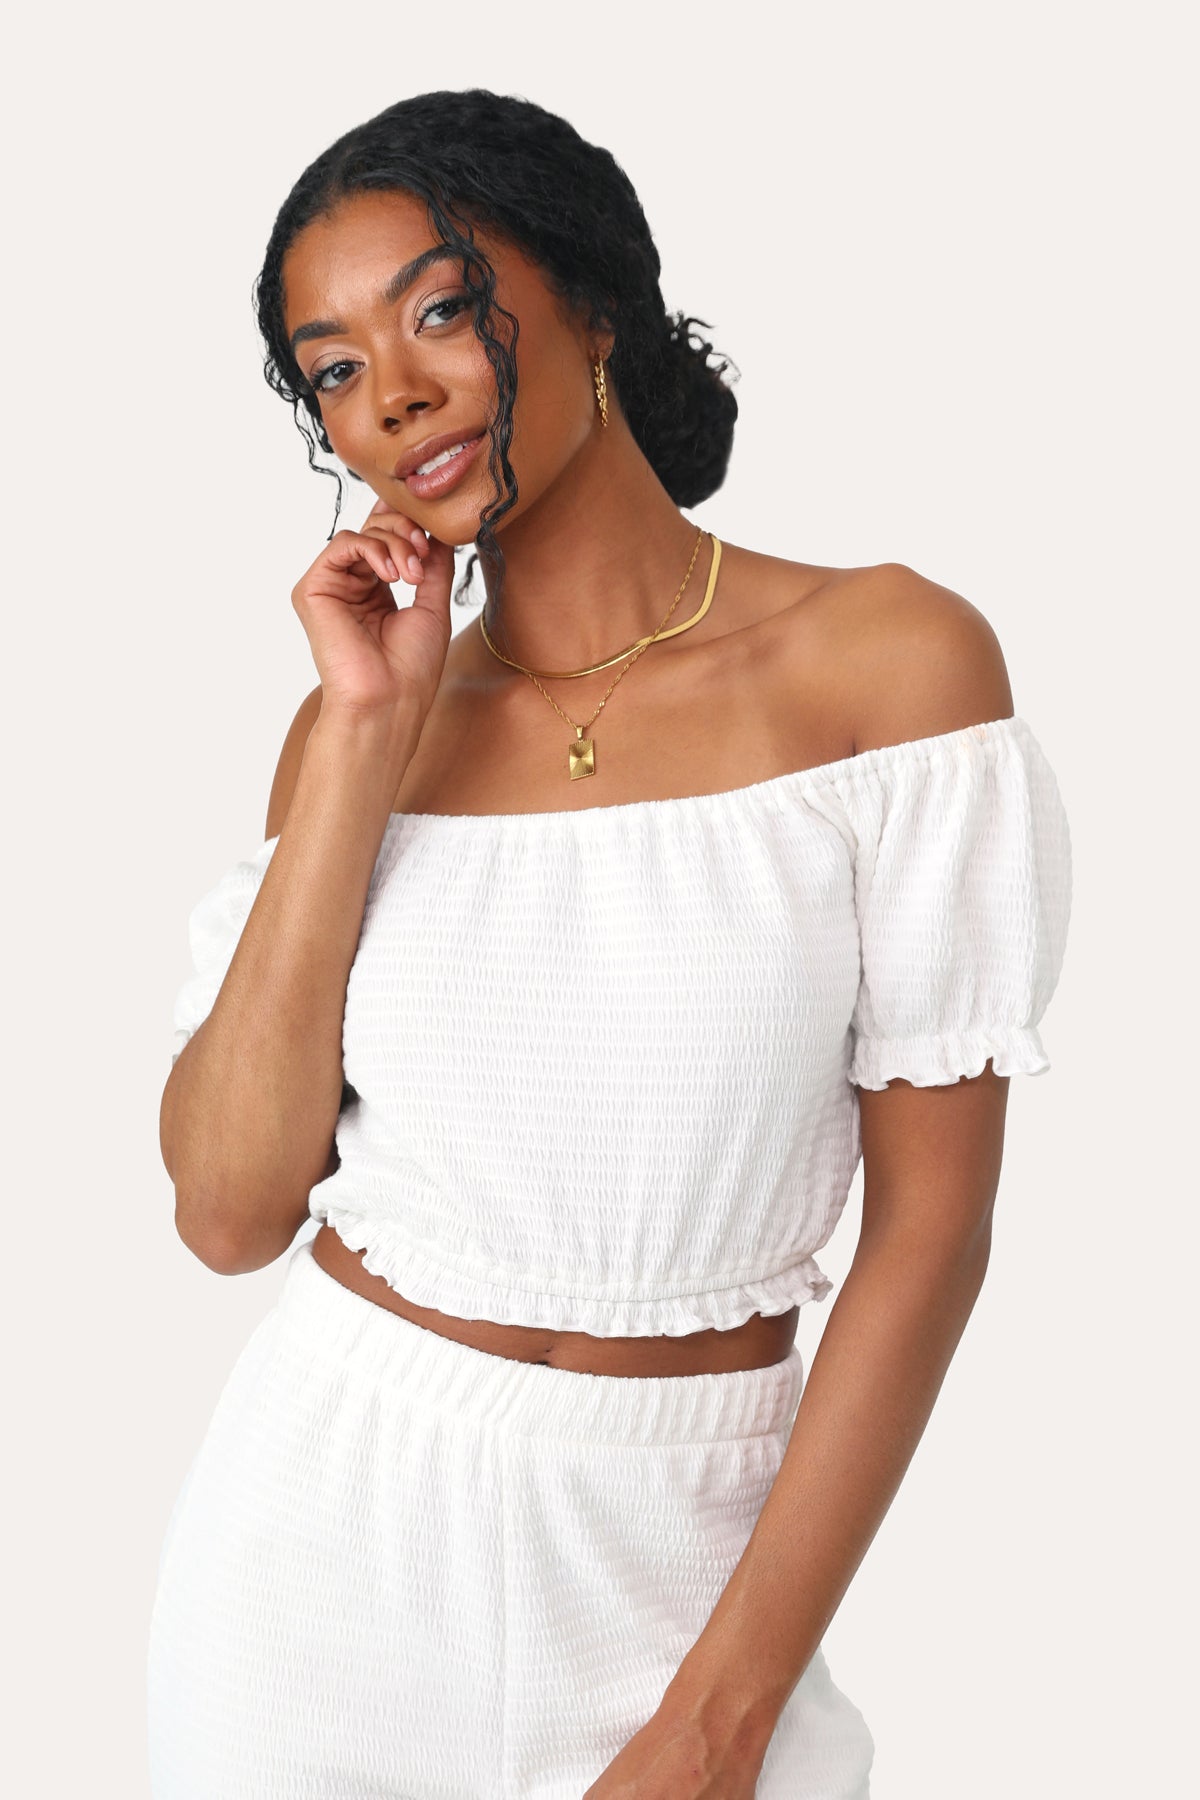 Model wearing the American Dream White Smocked top.